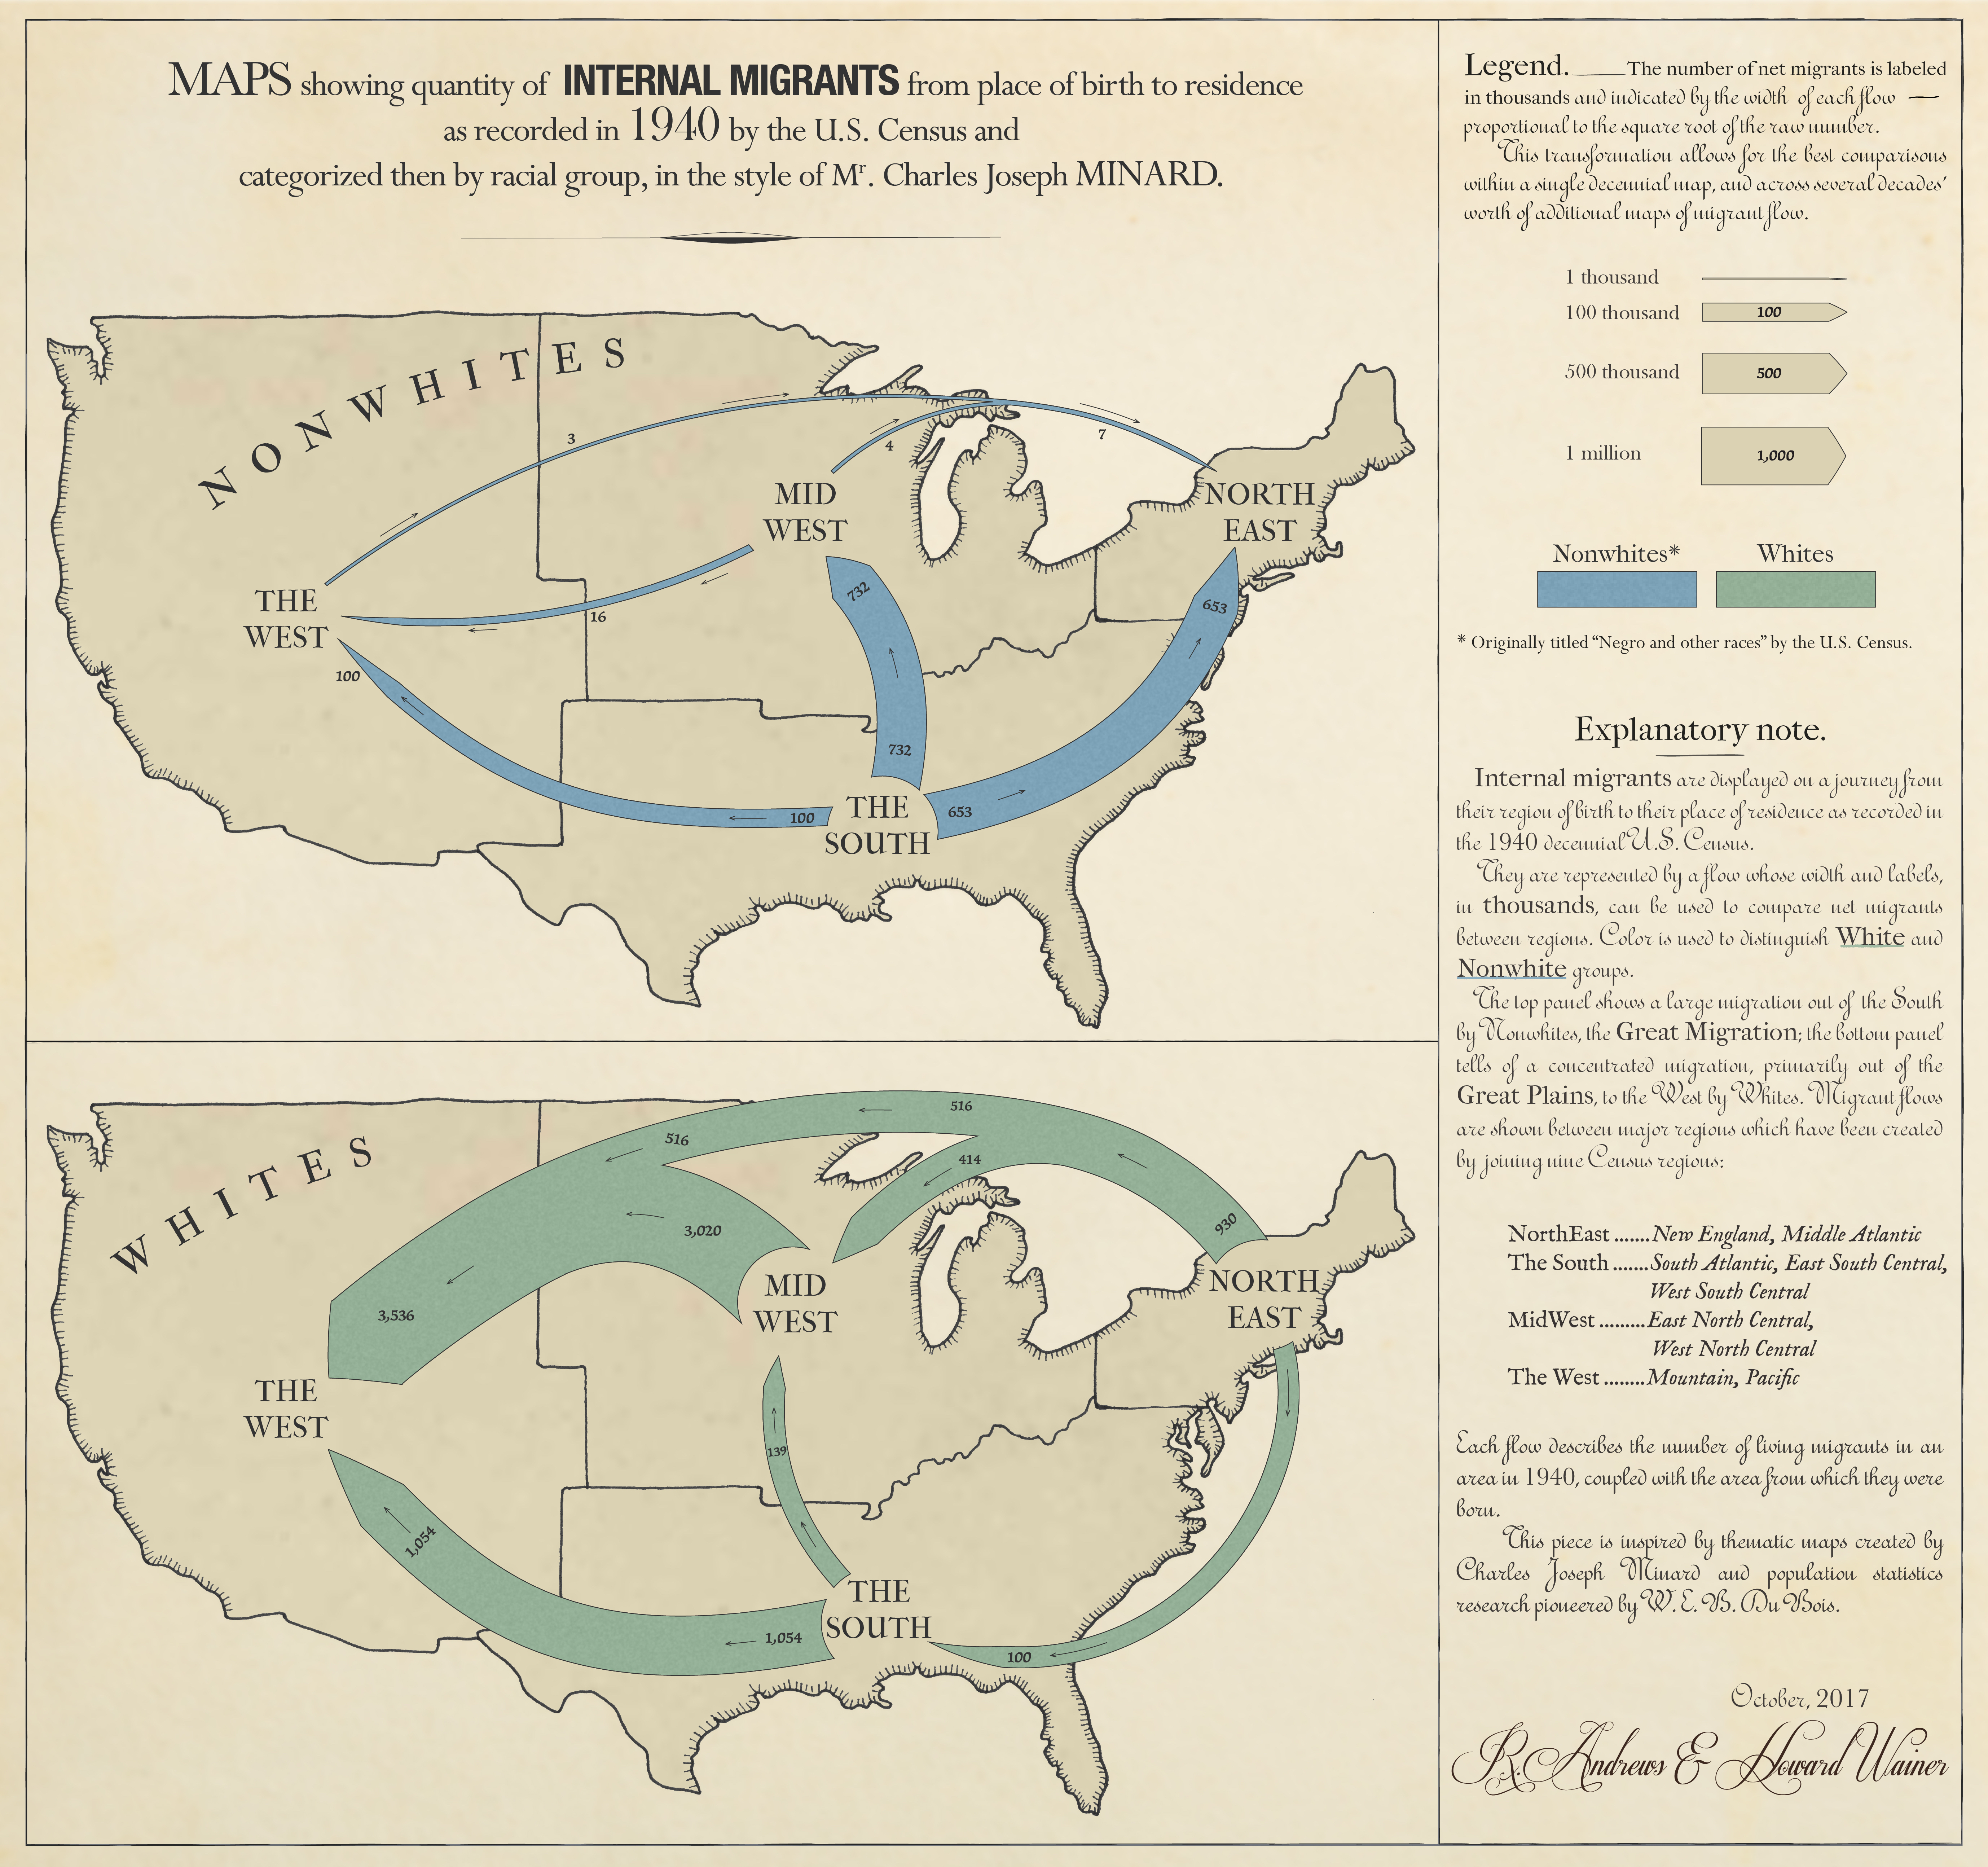 Flow maps for 1940: Maps showing the numbers of internal migrants by birthplace and place of residence, as recorded in the 1940 US Census, categorized by racial group, using a design inspired by Minard.